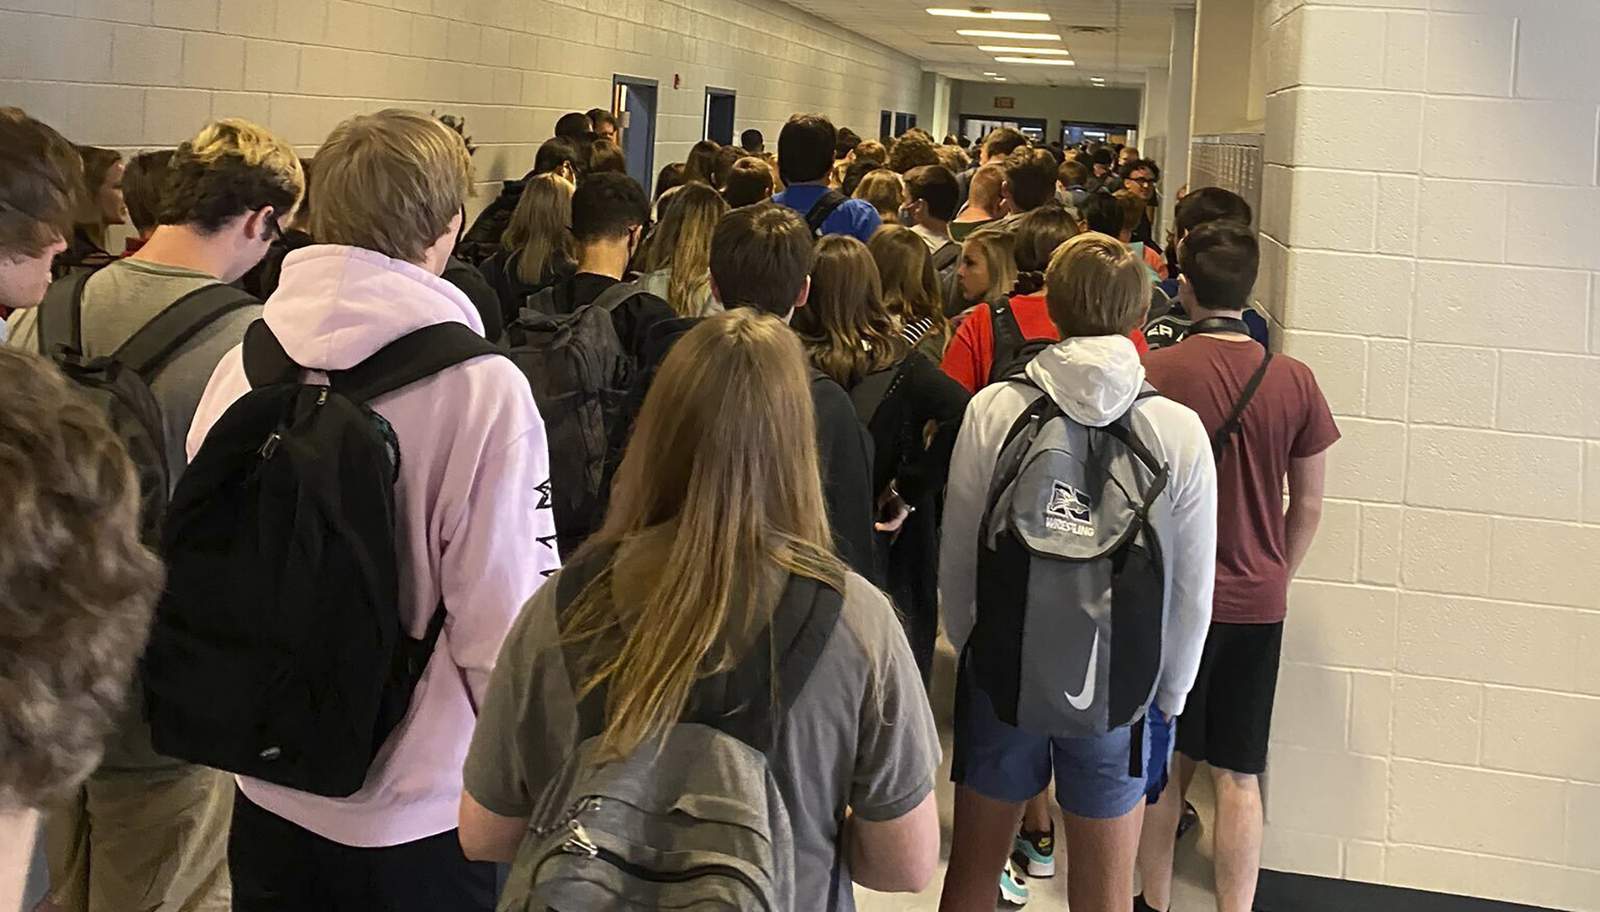 Georgia school with large crowds reports positive cases